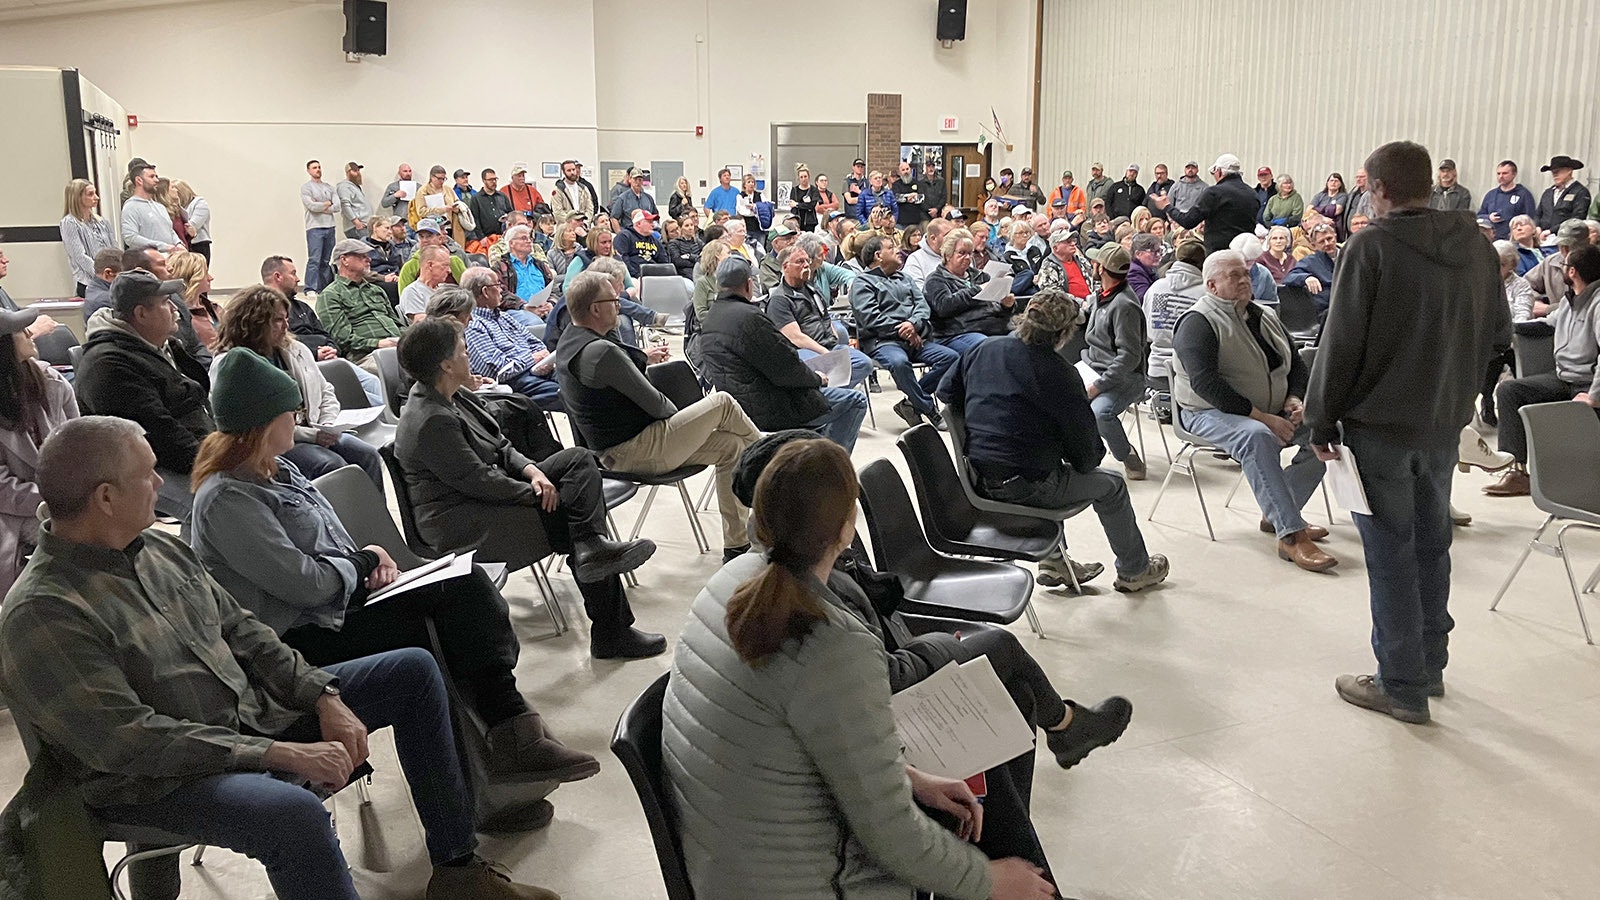 Nearly 200 residents from Casper gathered Thursday night to solidify efforts against any gravel mining at the base of Casper Mountain.